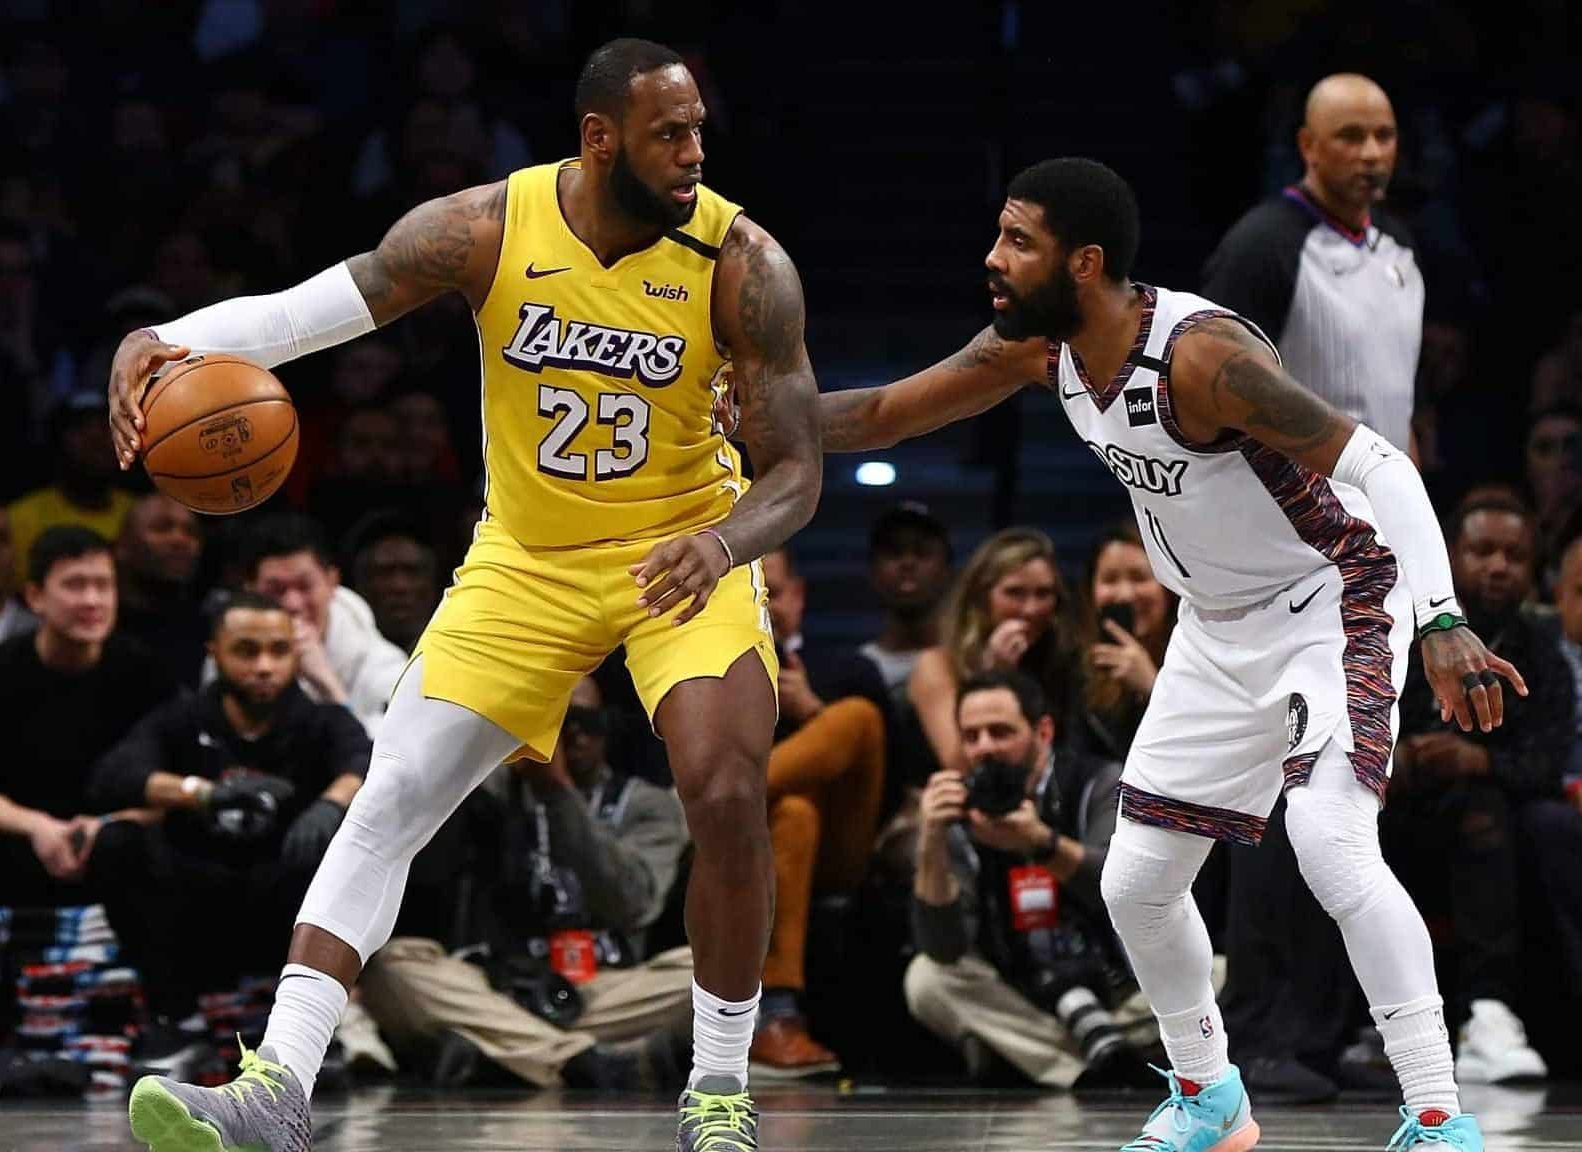 Possible finals preview - nets vs Lakers